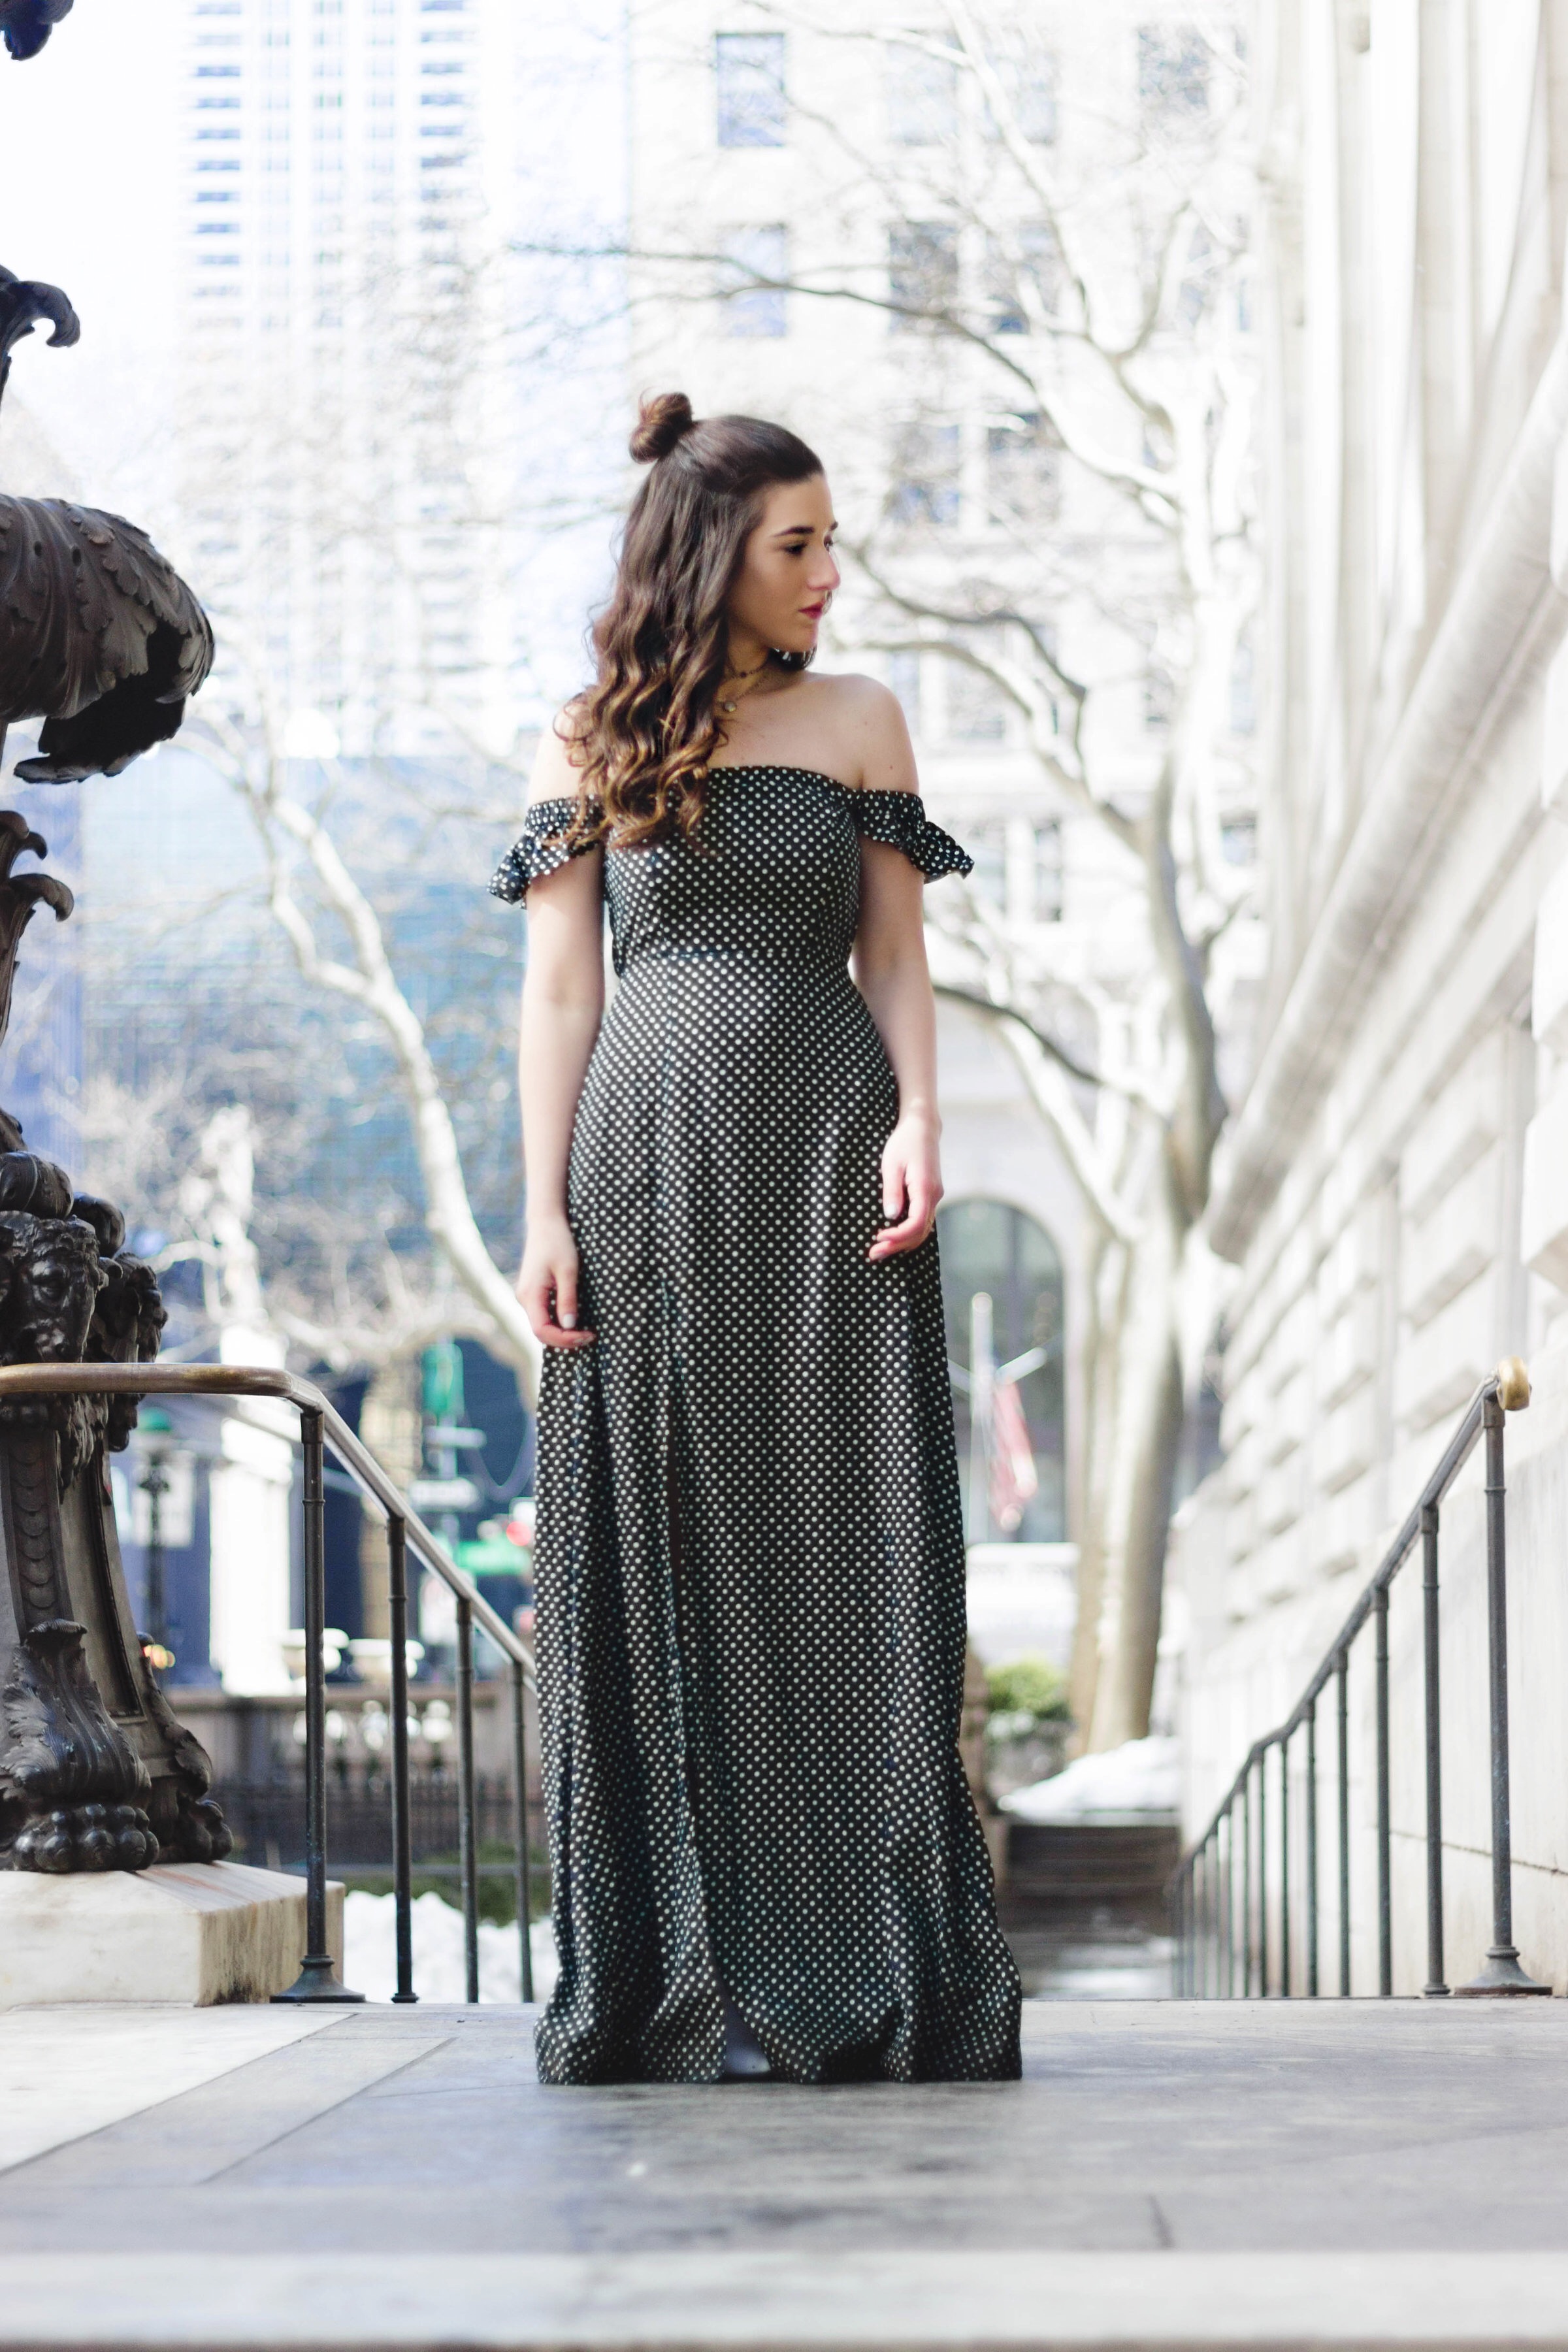 Polka Dot Maxi Dress Beach Hat How To Afford Living In NYC Esther Santer Fashion Blog NYC Street Style Blogger Outfit OOTD Trendy Topknot Girl Women Feminine Summer Look  Cold Shoulder New York City Chokers Ela Rae Jewelry Accessories Lulus Giovannio.jpg